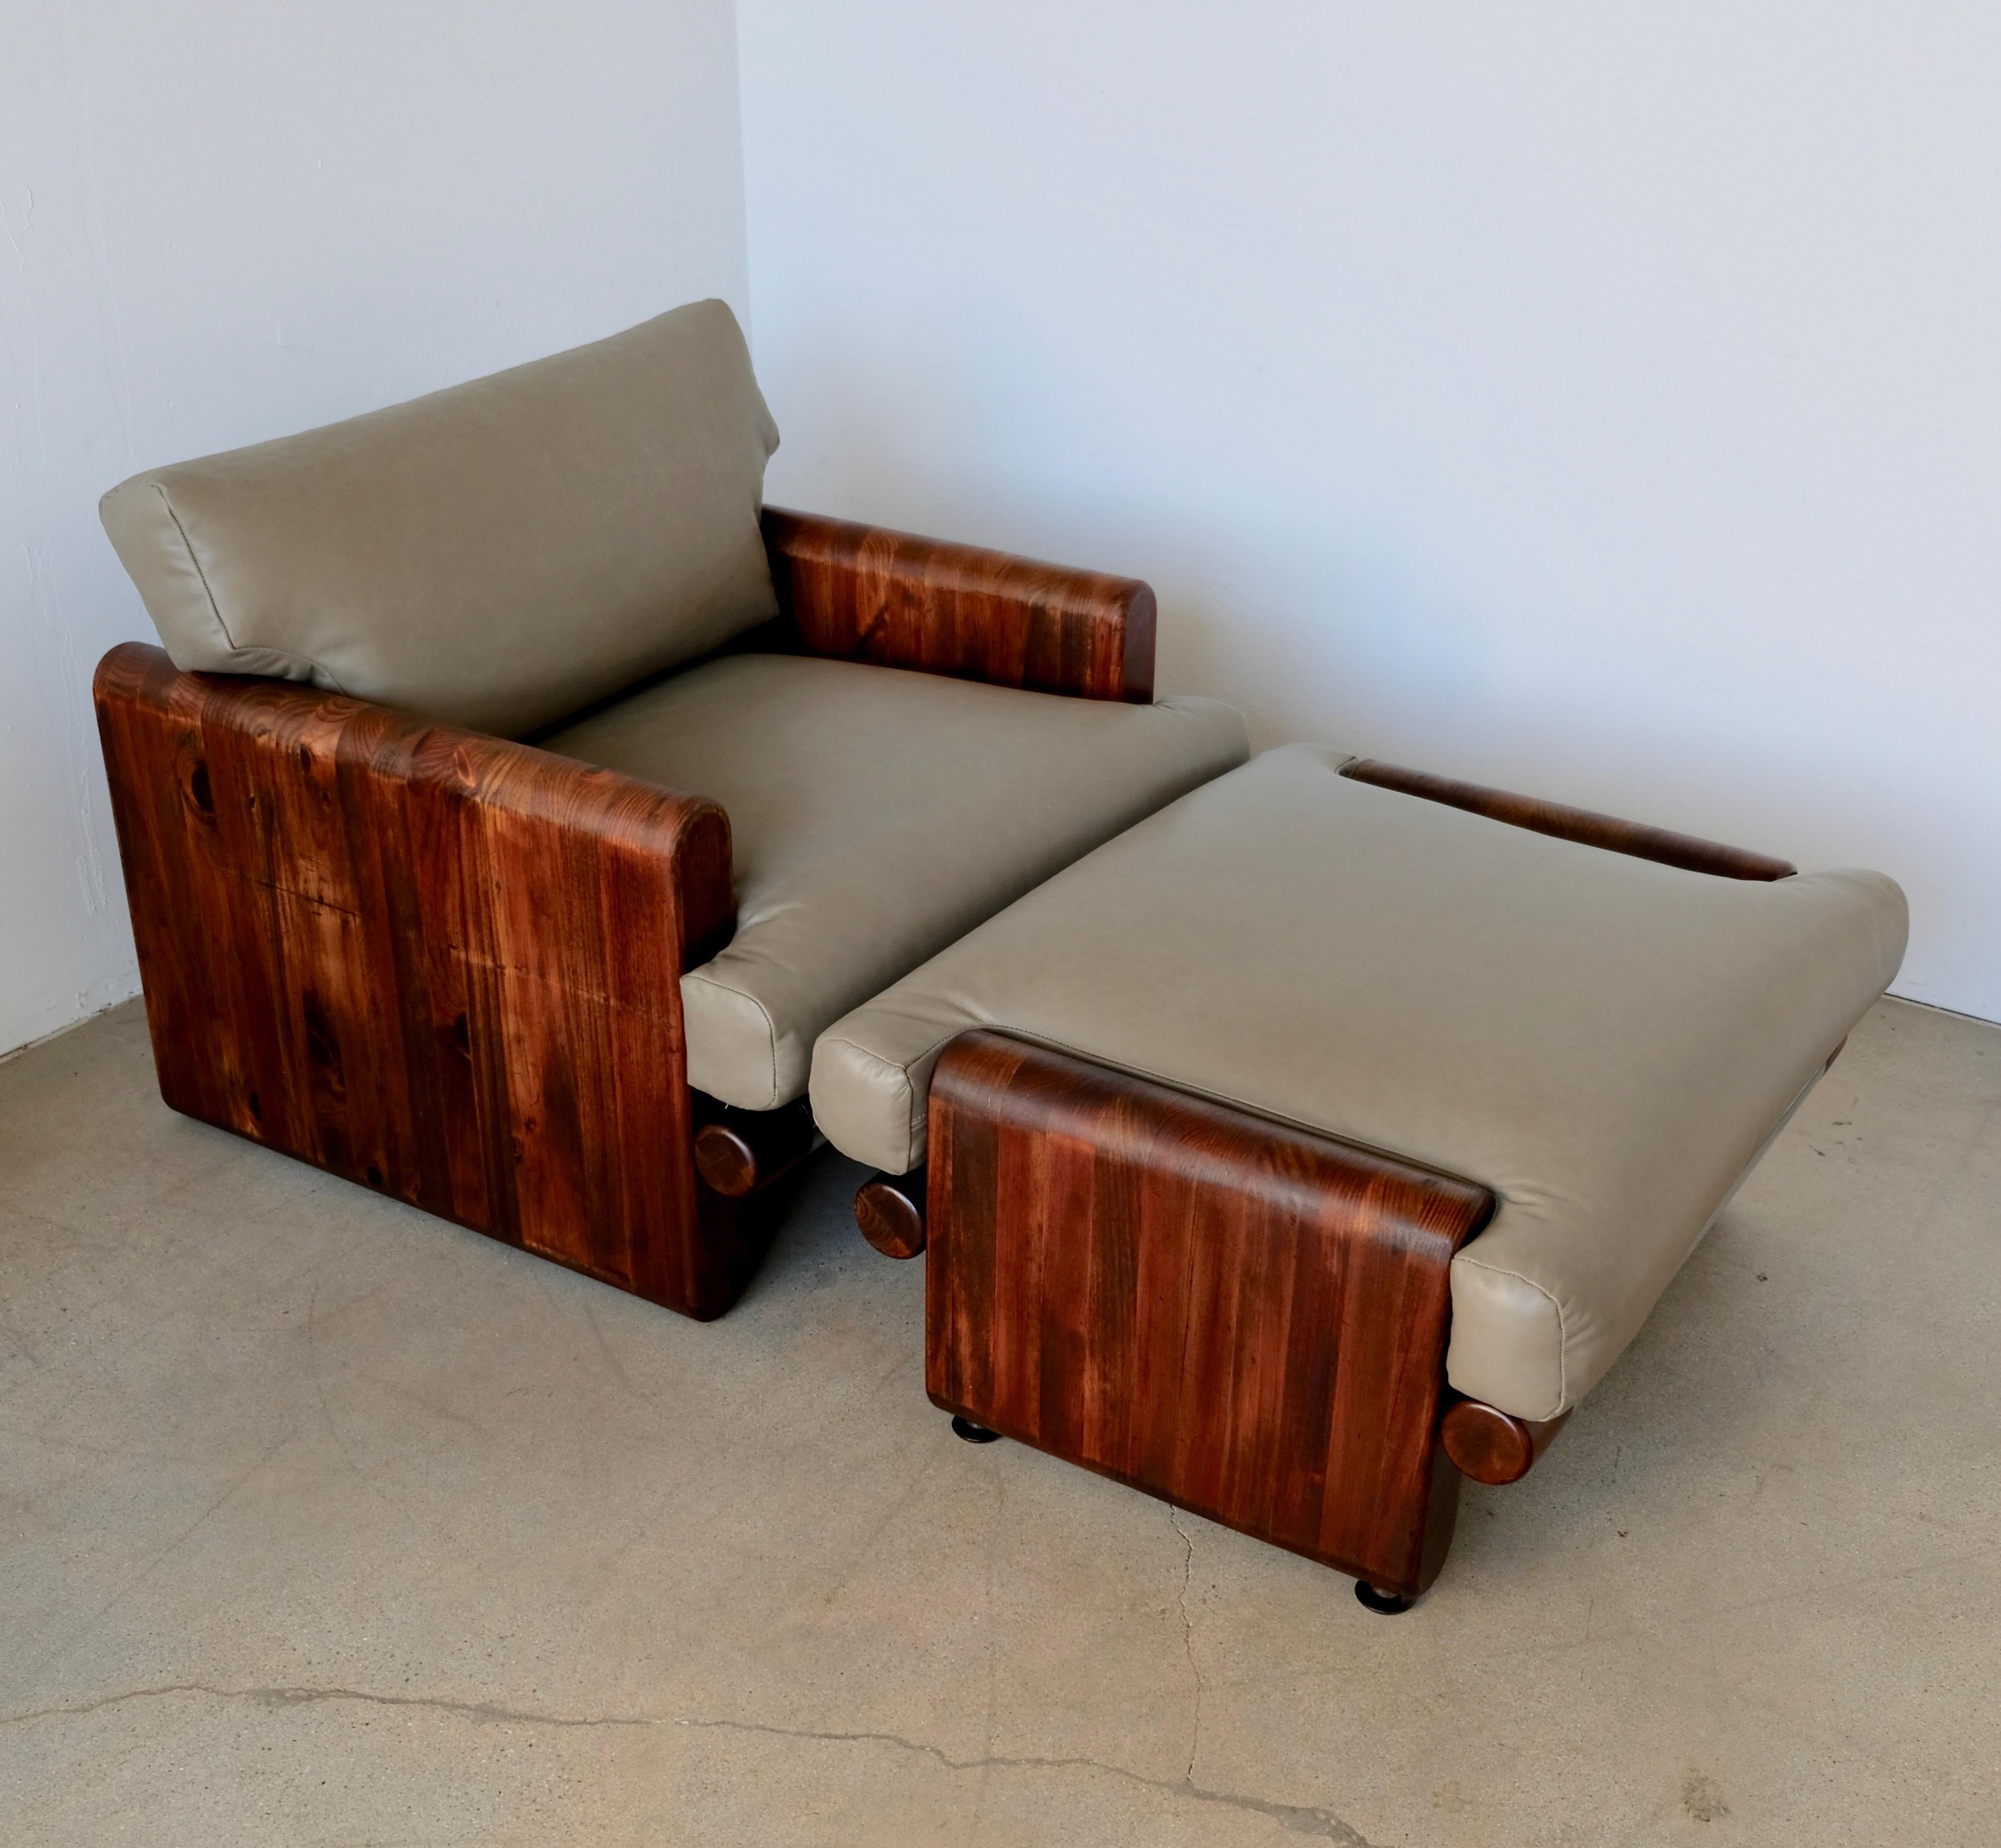 20th Century Made in California Wood and Leather Lounge Chair and Ottoman by John Caldwell